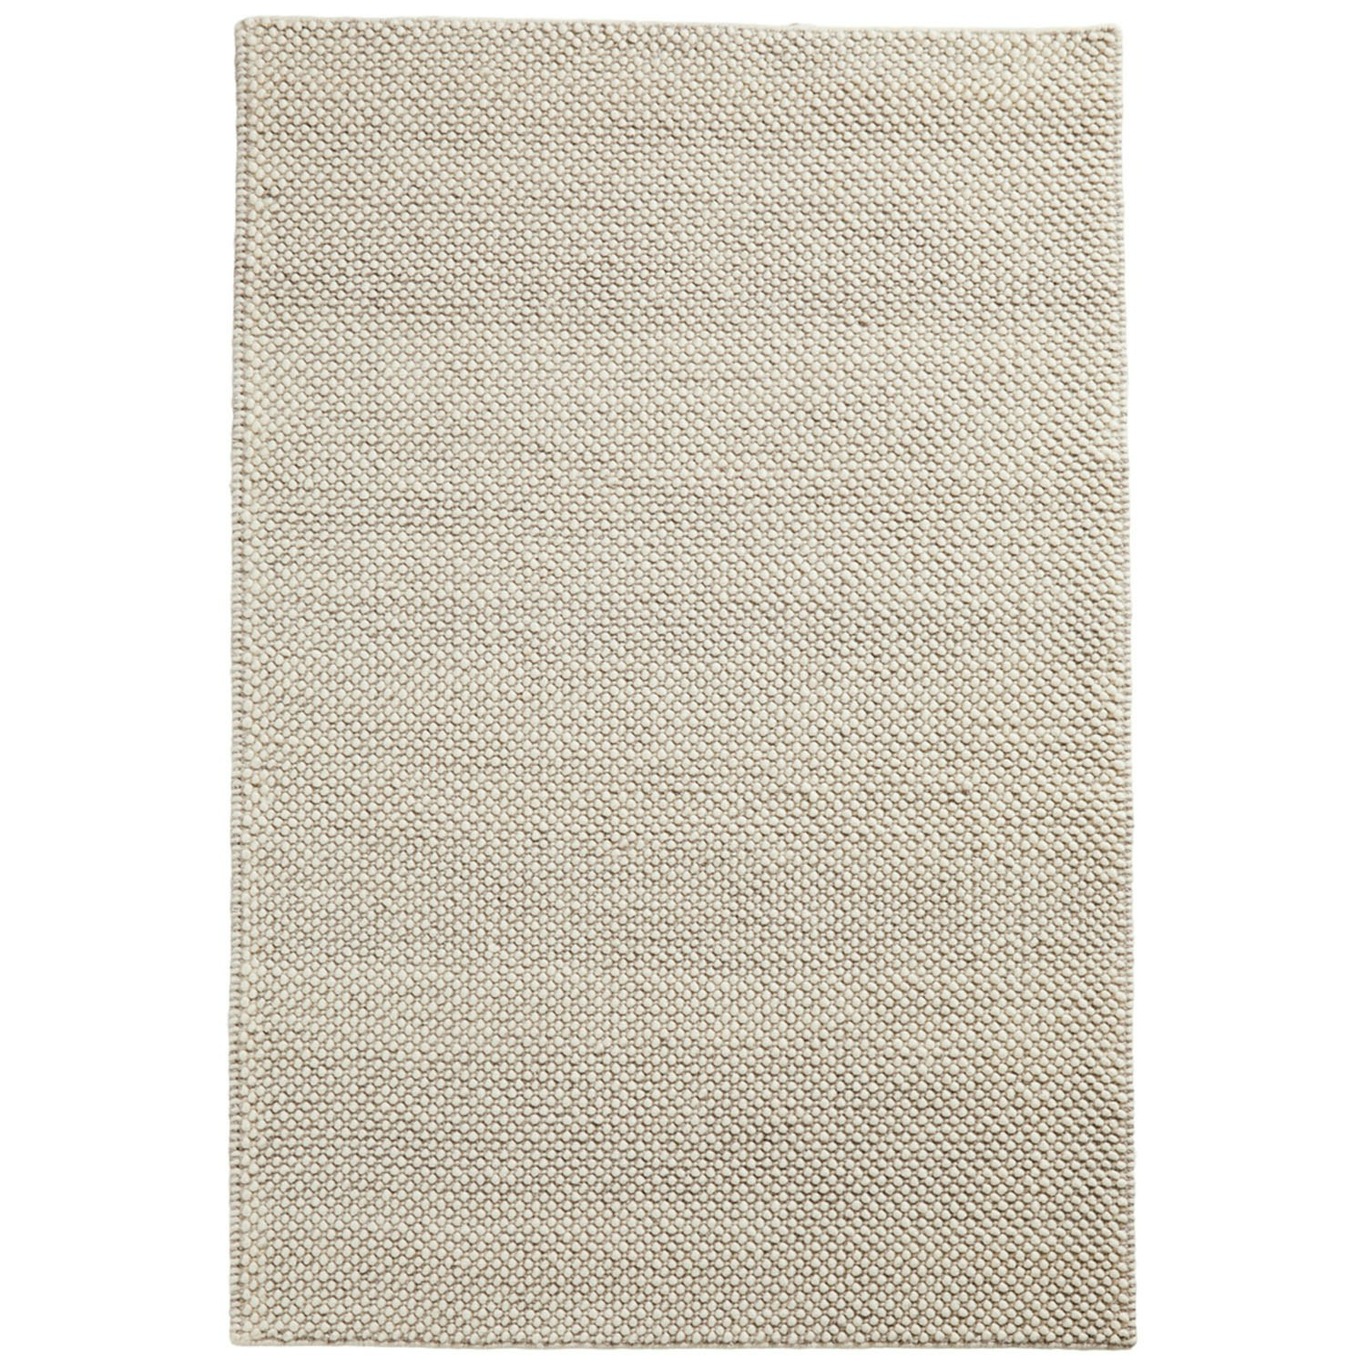 Tact Rug Wool 200x300 cm, Off-white